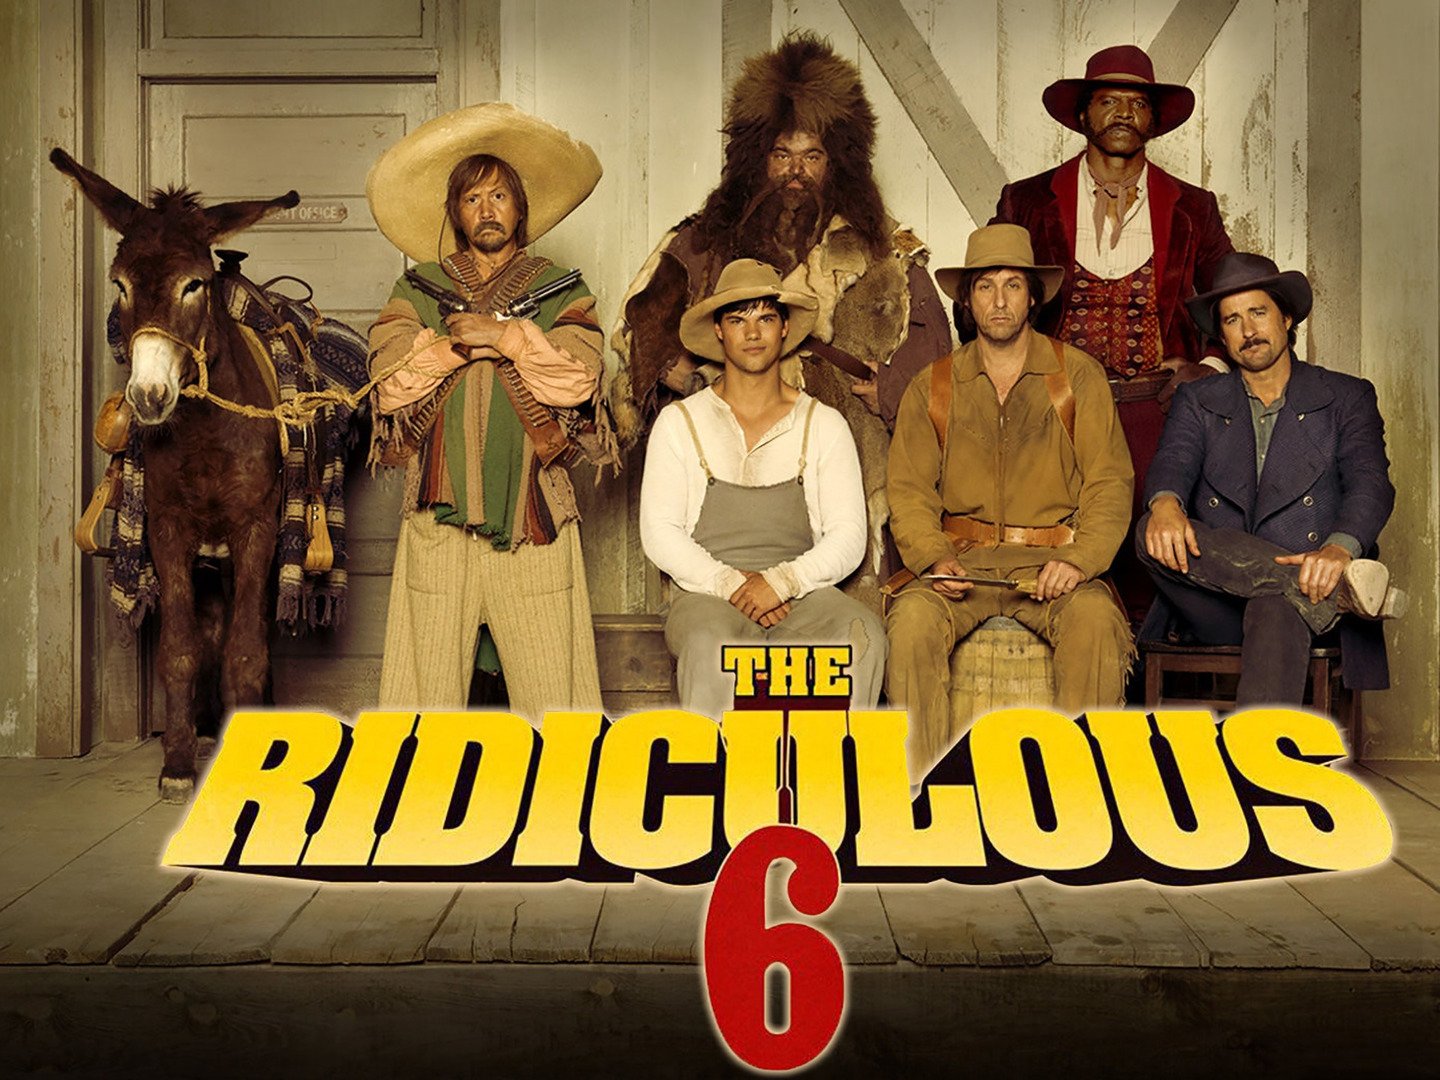 The Ridiculous 6 Trailer 1 Trailers & Videos Rotten Tomatoes